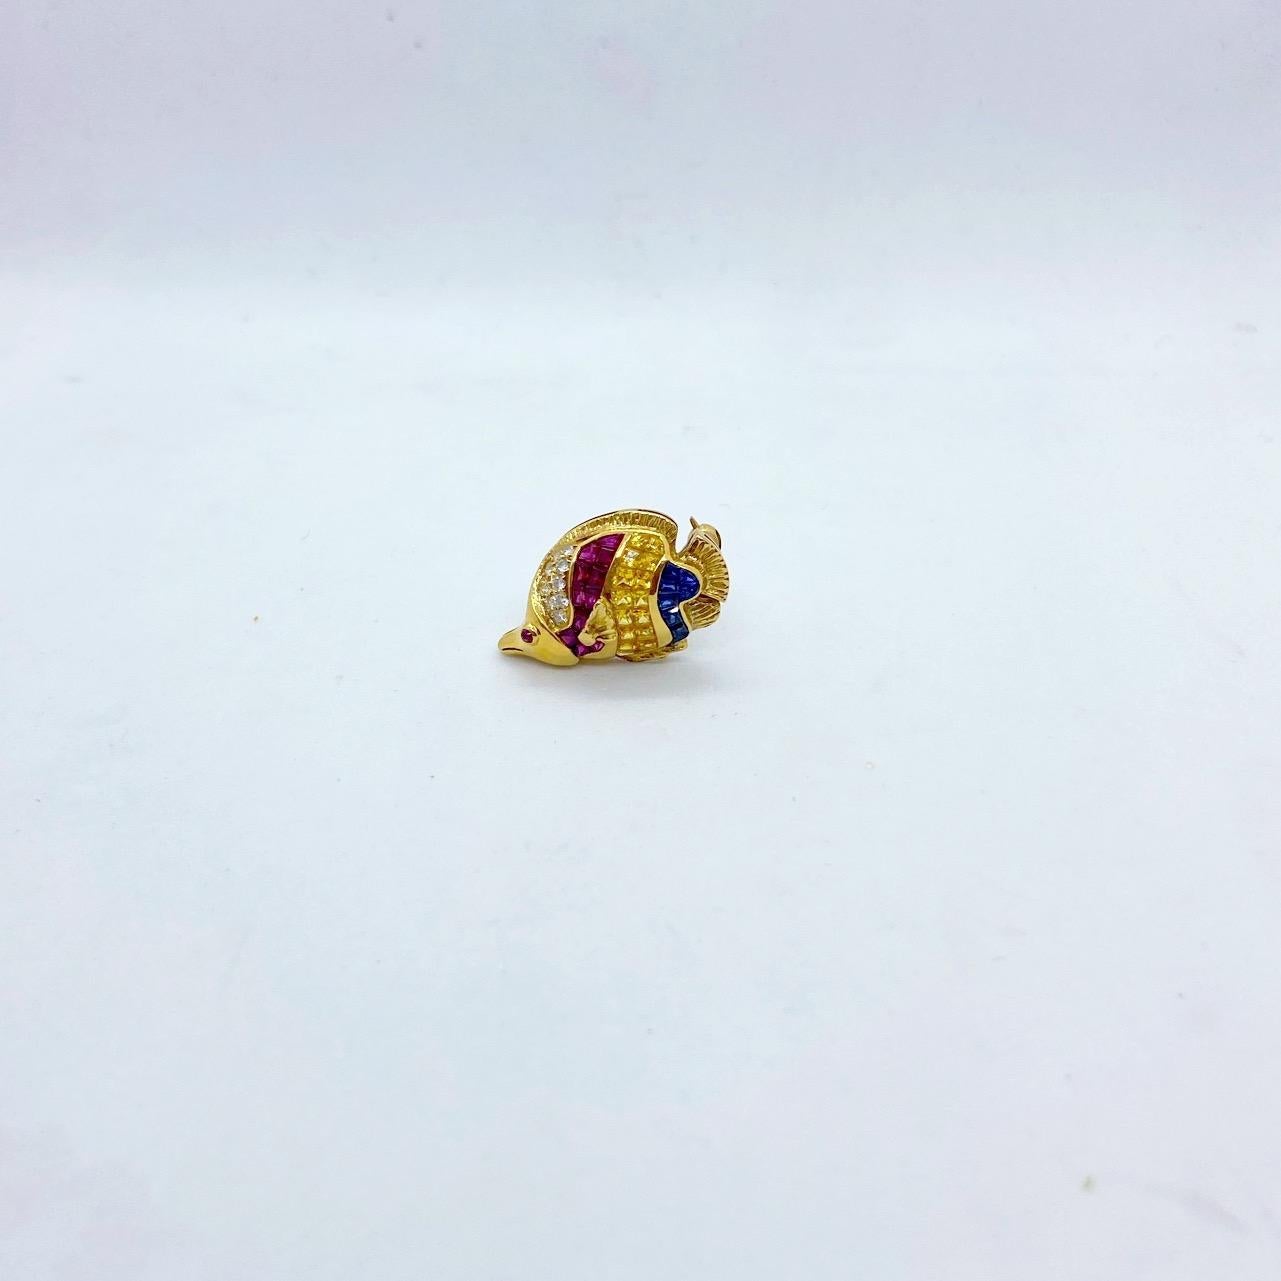 A beautiful interpretation of an angelfish. This 18 karat yellow gold brooch has been invisibly set with square cut rubies,blue and yellow sapphires along with pave set round brilliant diamonds. A cabochon ruby is set for the eye. The fish measures